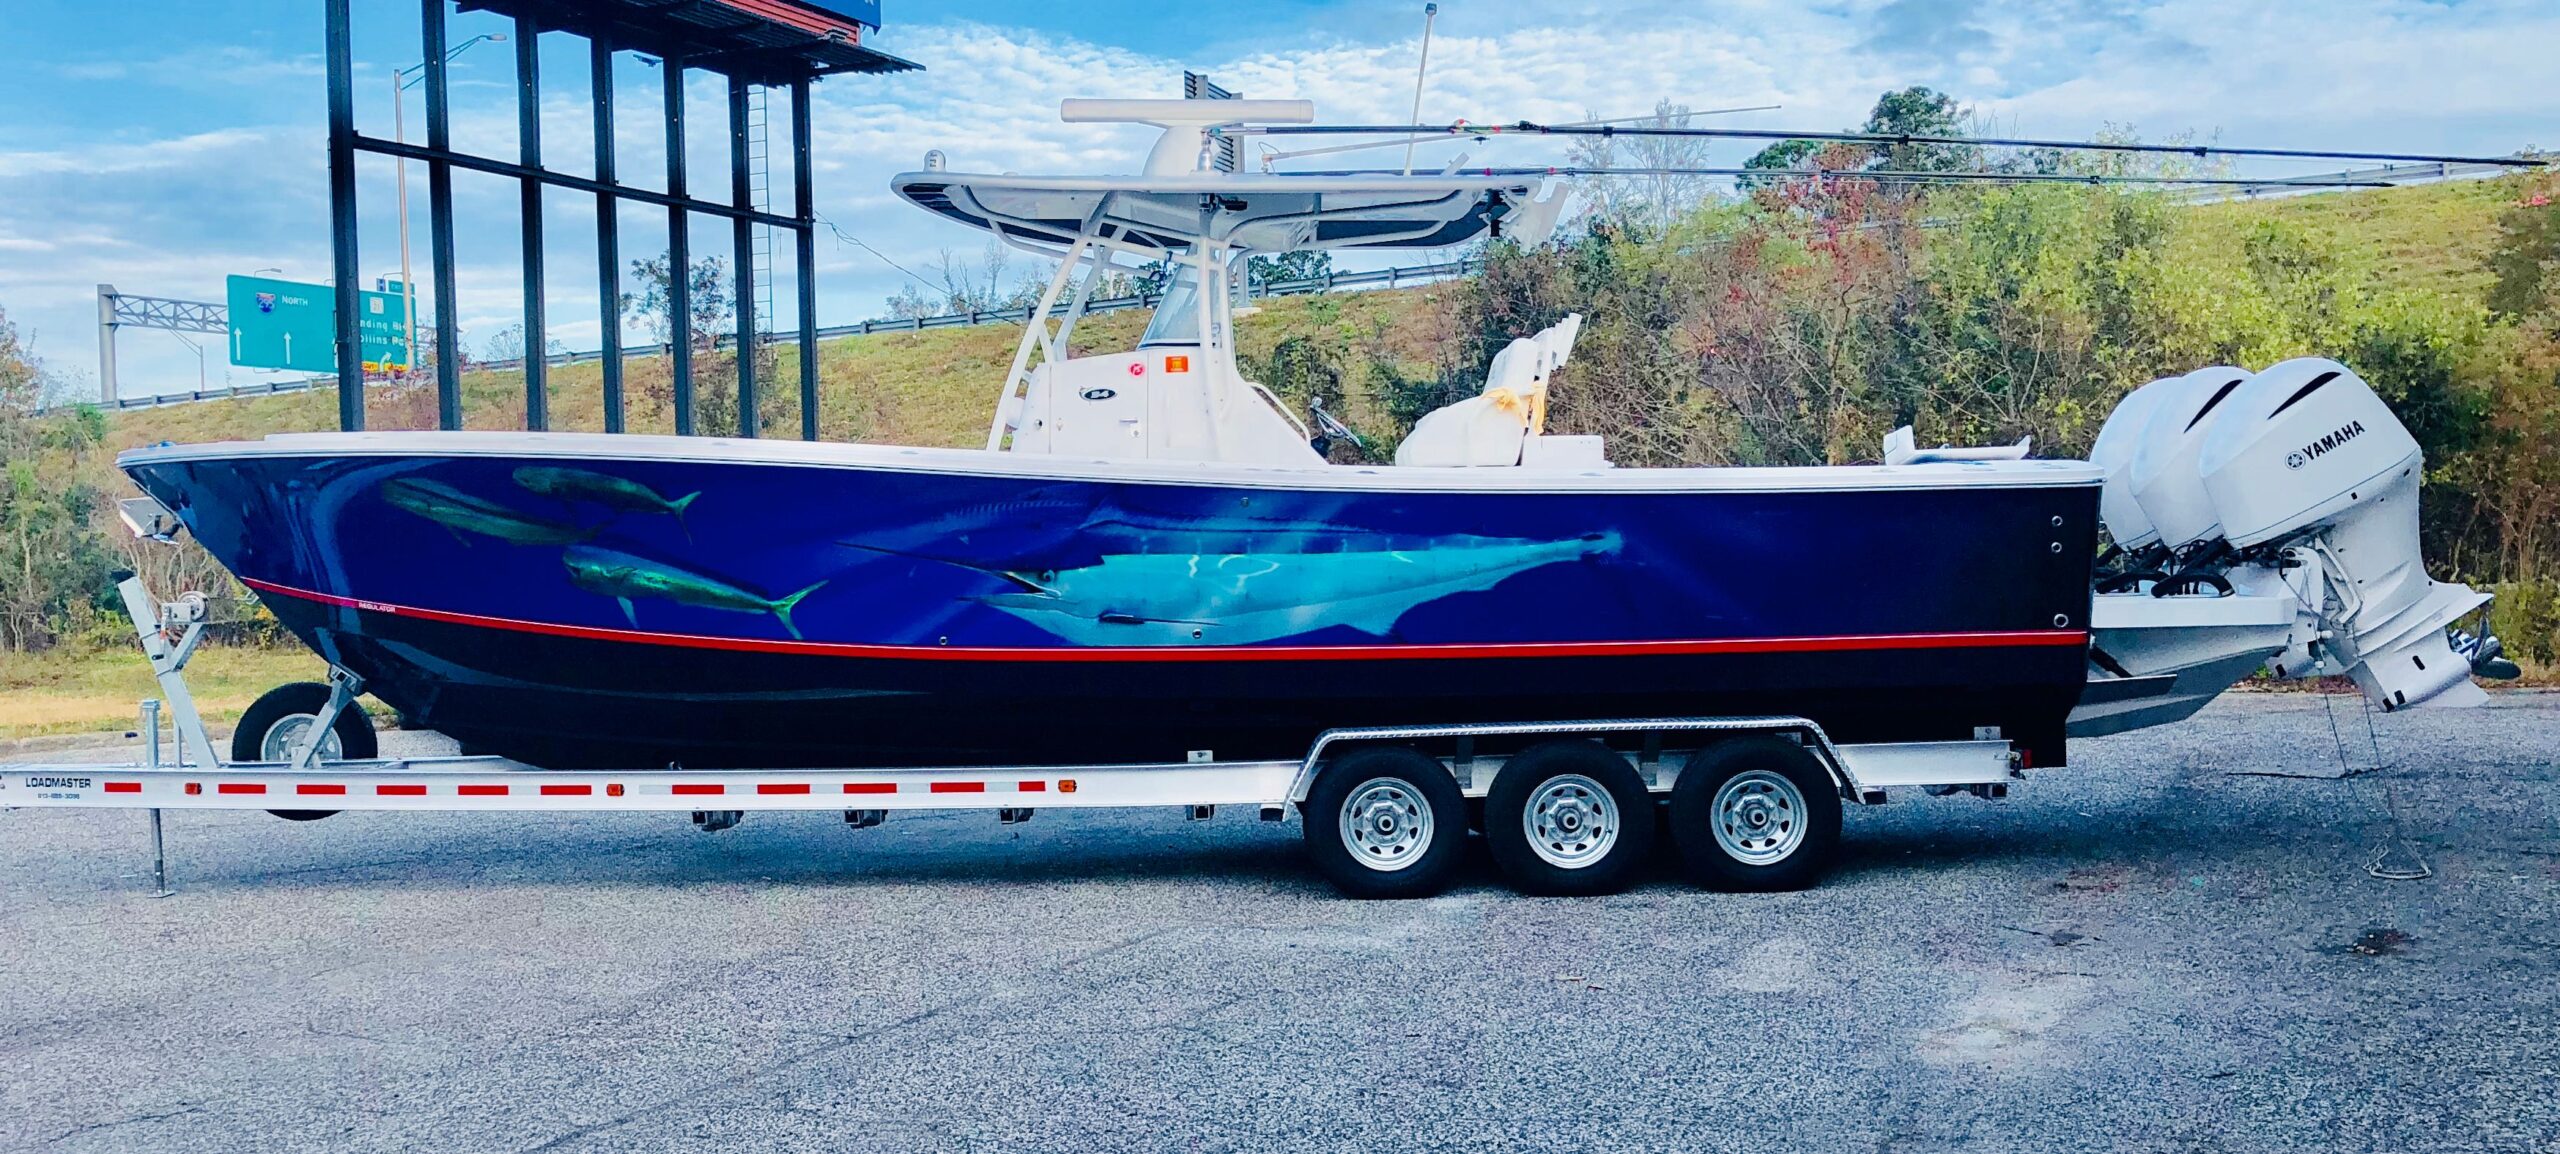 Long Regulator fishing boat with a full deep sea themed boat wrap design. Professional "Regulator" design wrapped, by Wraps Direct located in Jacksonville, FL